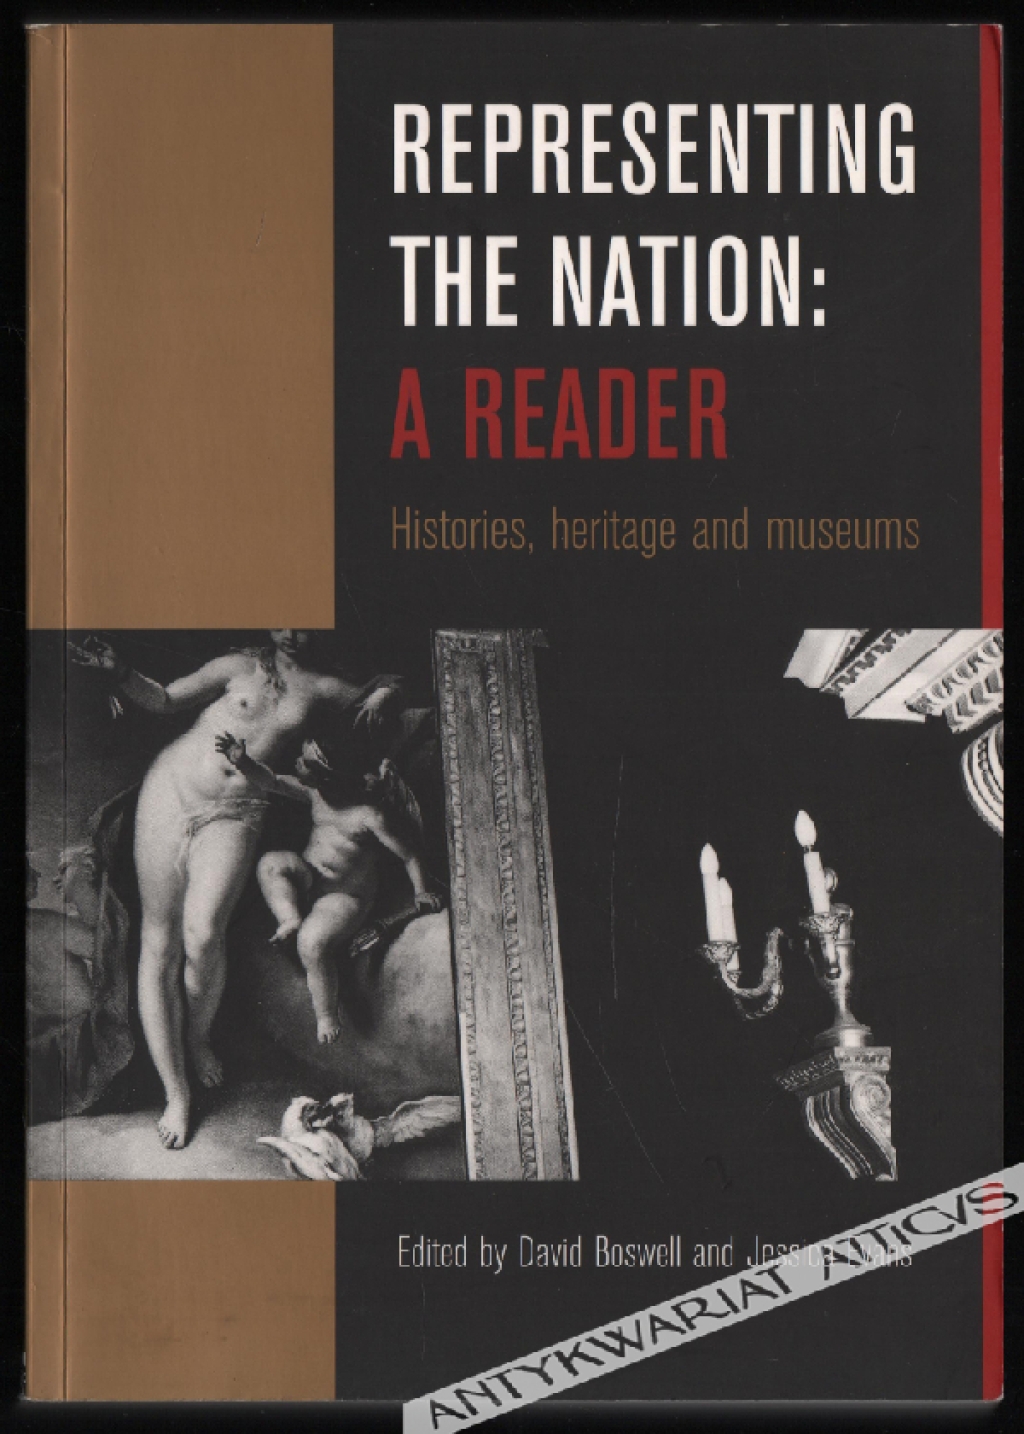 Representing the Nation: A Reader. Histories, heritage and museums